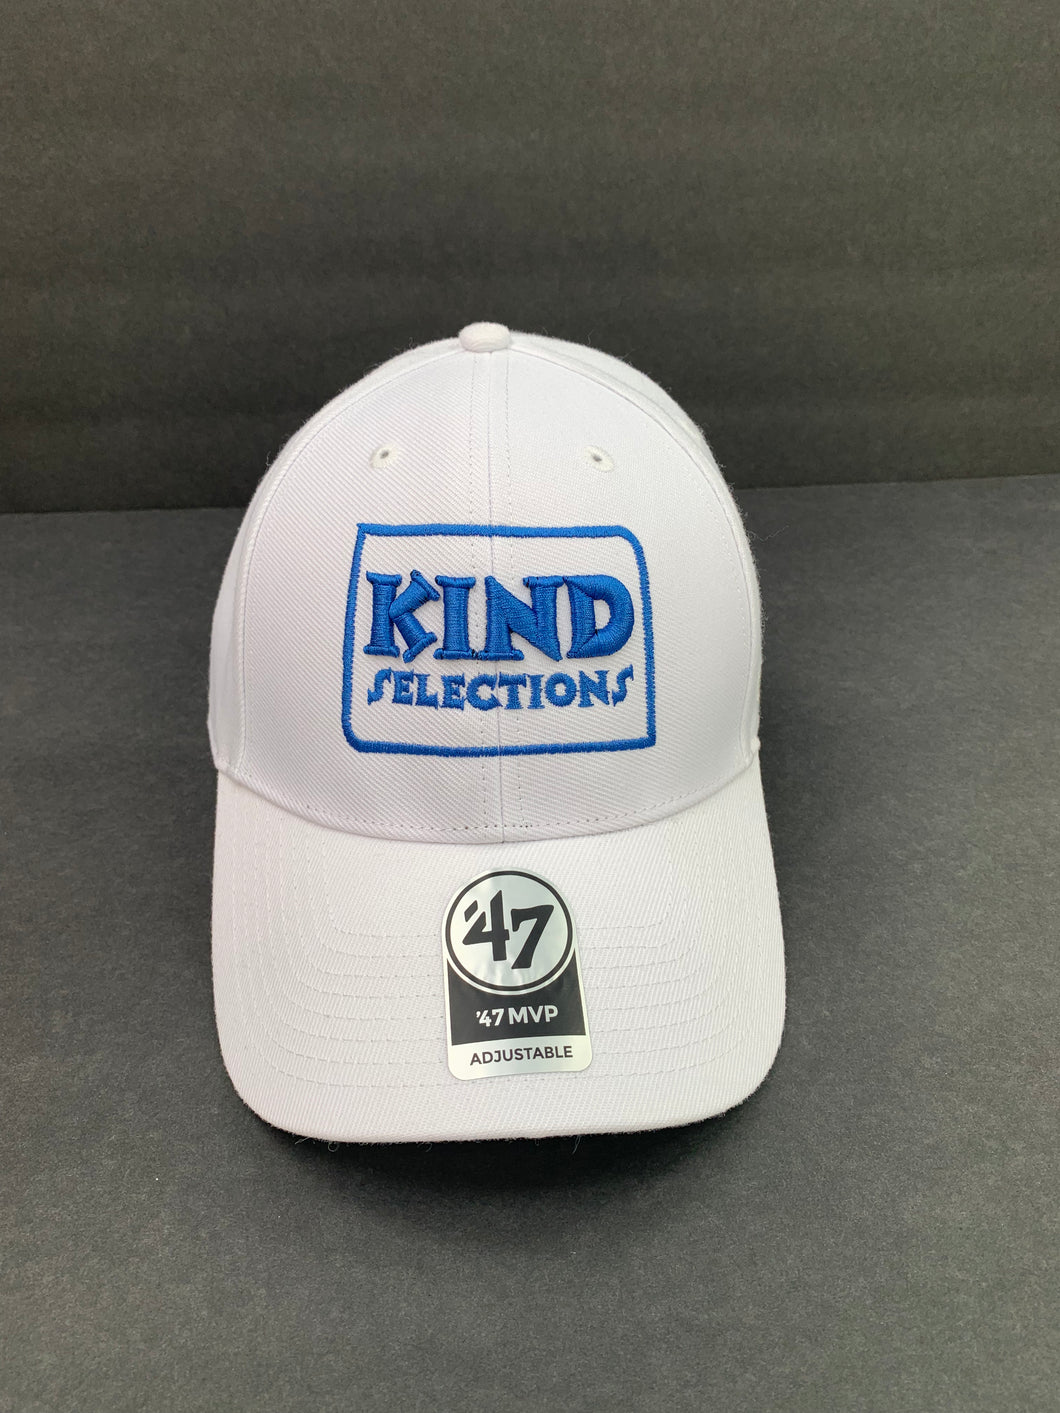 Kind Selections Special Edition Classic '47 MVP Cap - Royal Blue